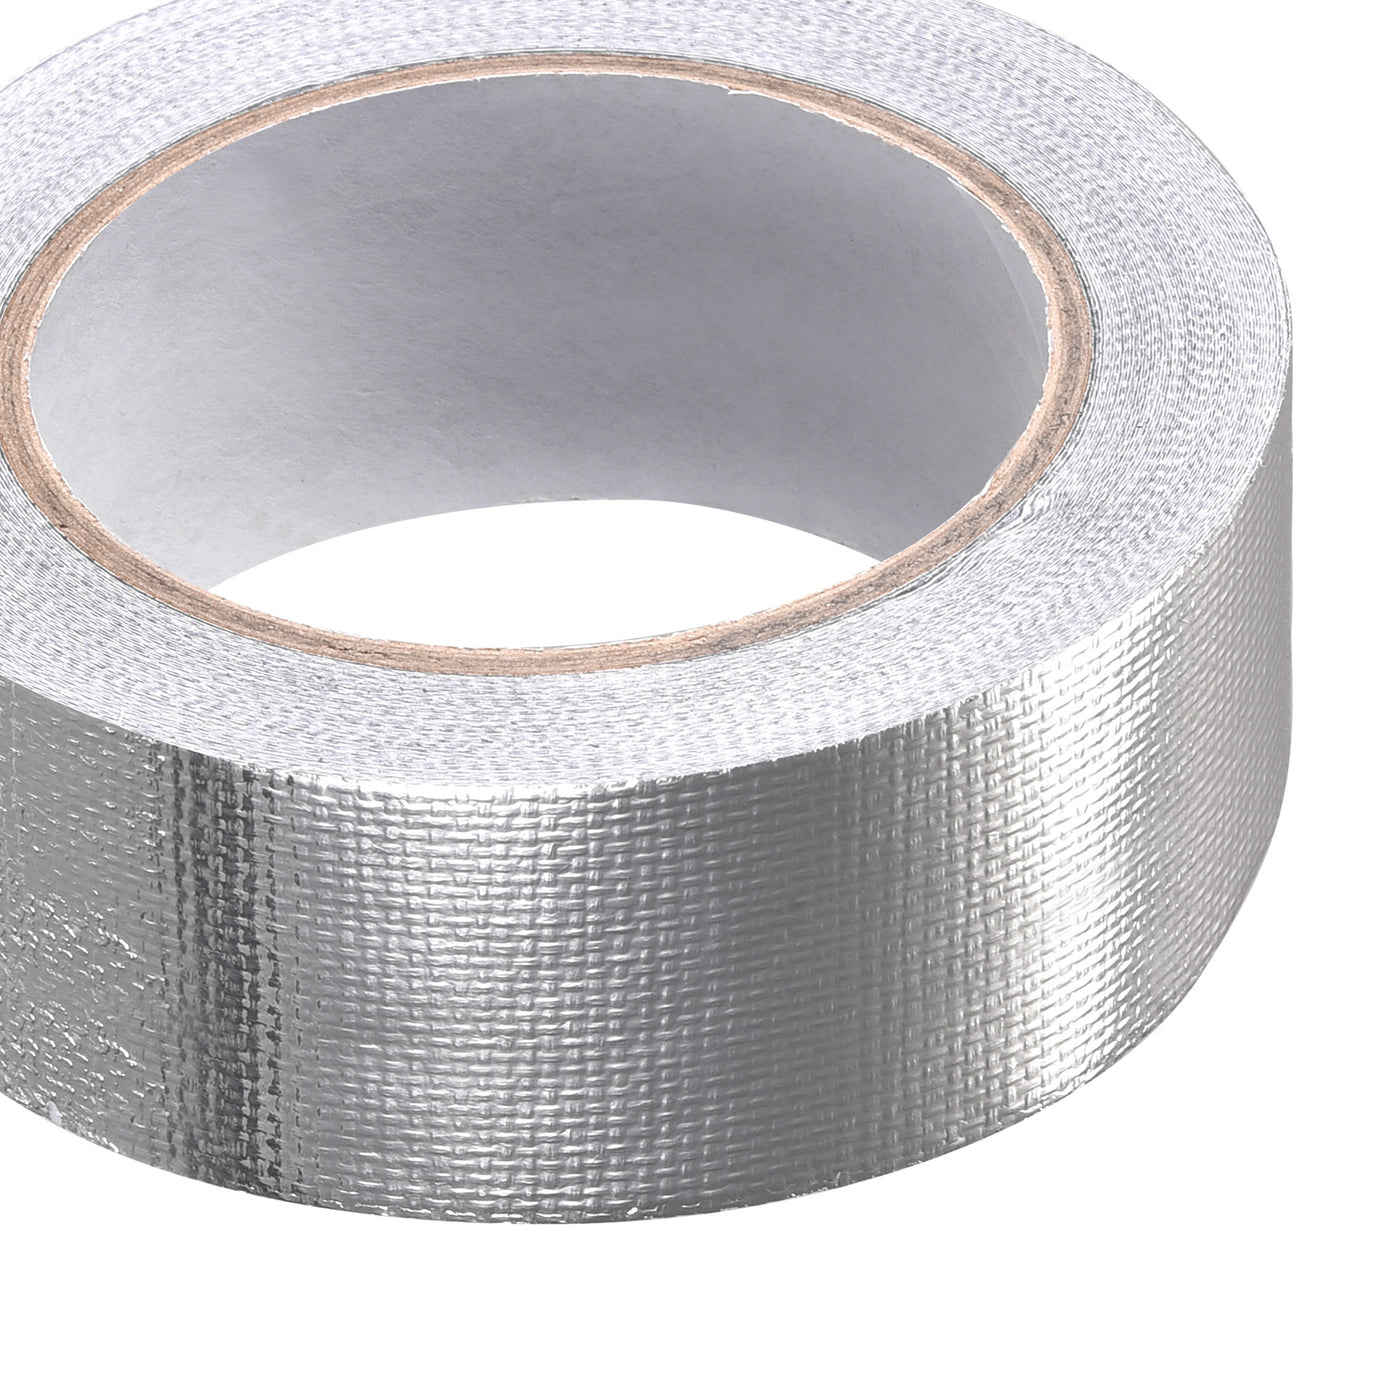 uxcell Uxcell Aluminum Foil Tape High-Temperature Tape for HVAC,Sealing 50mmx20m/65ft